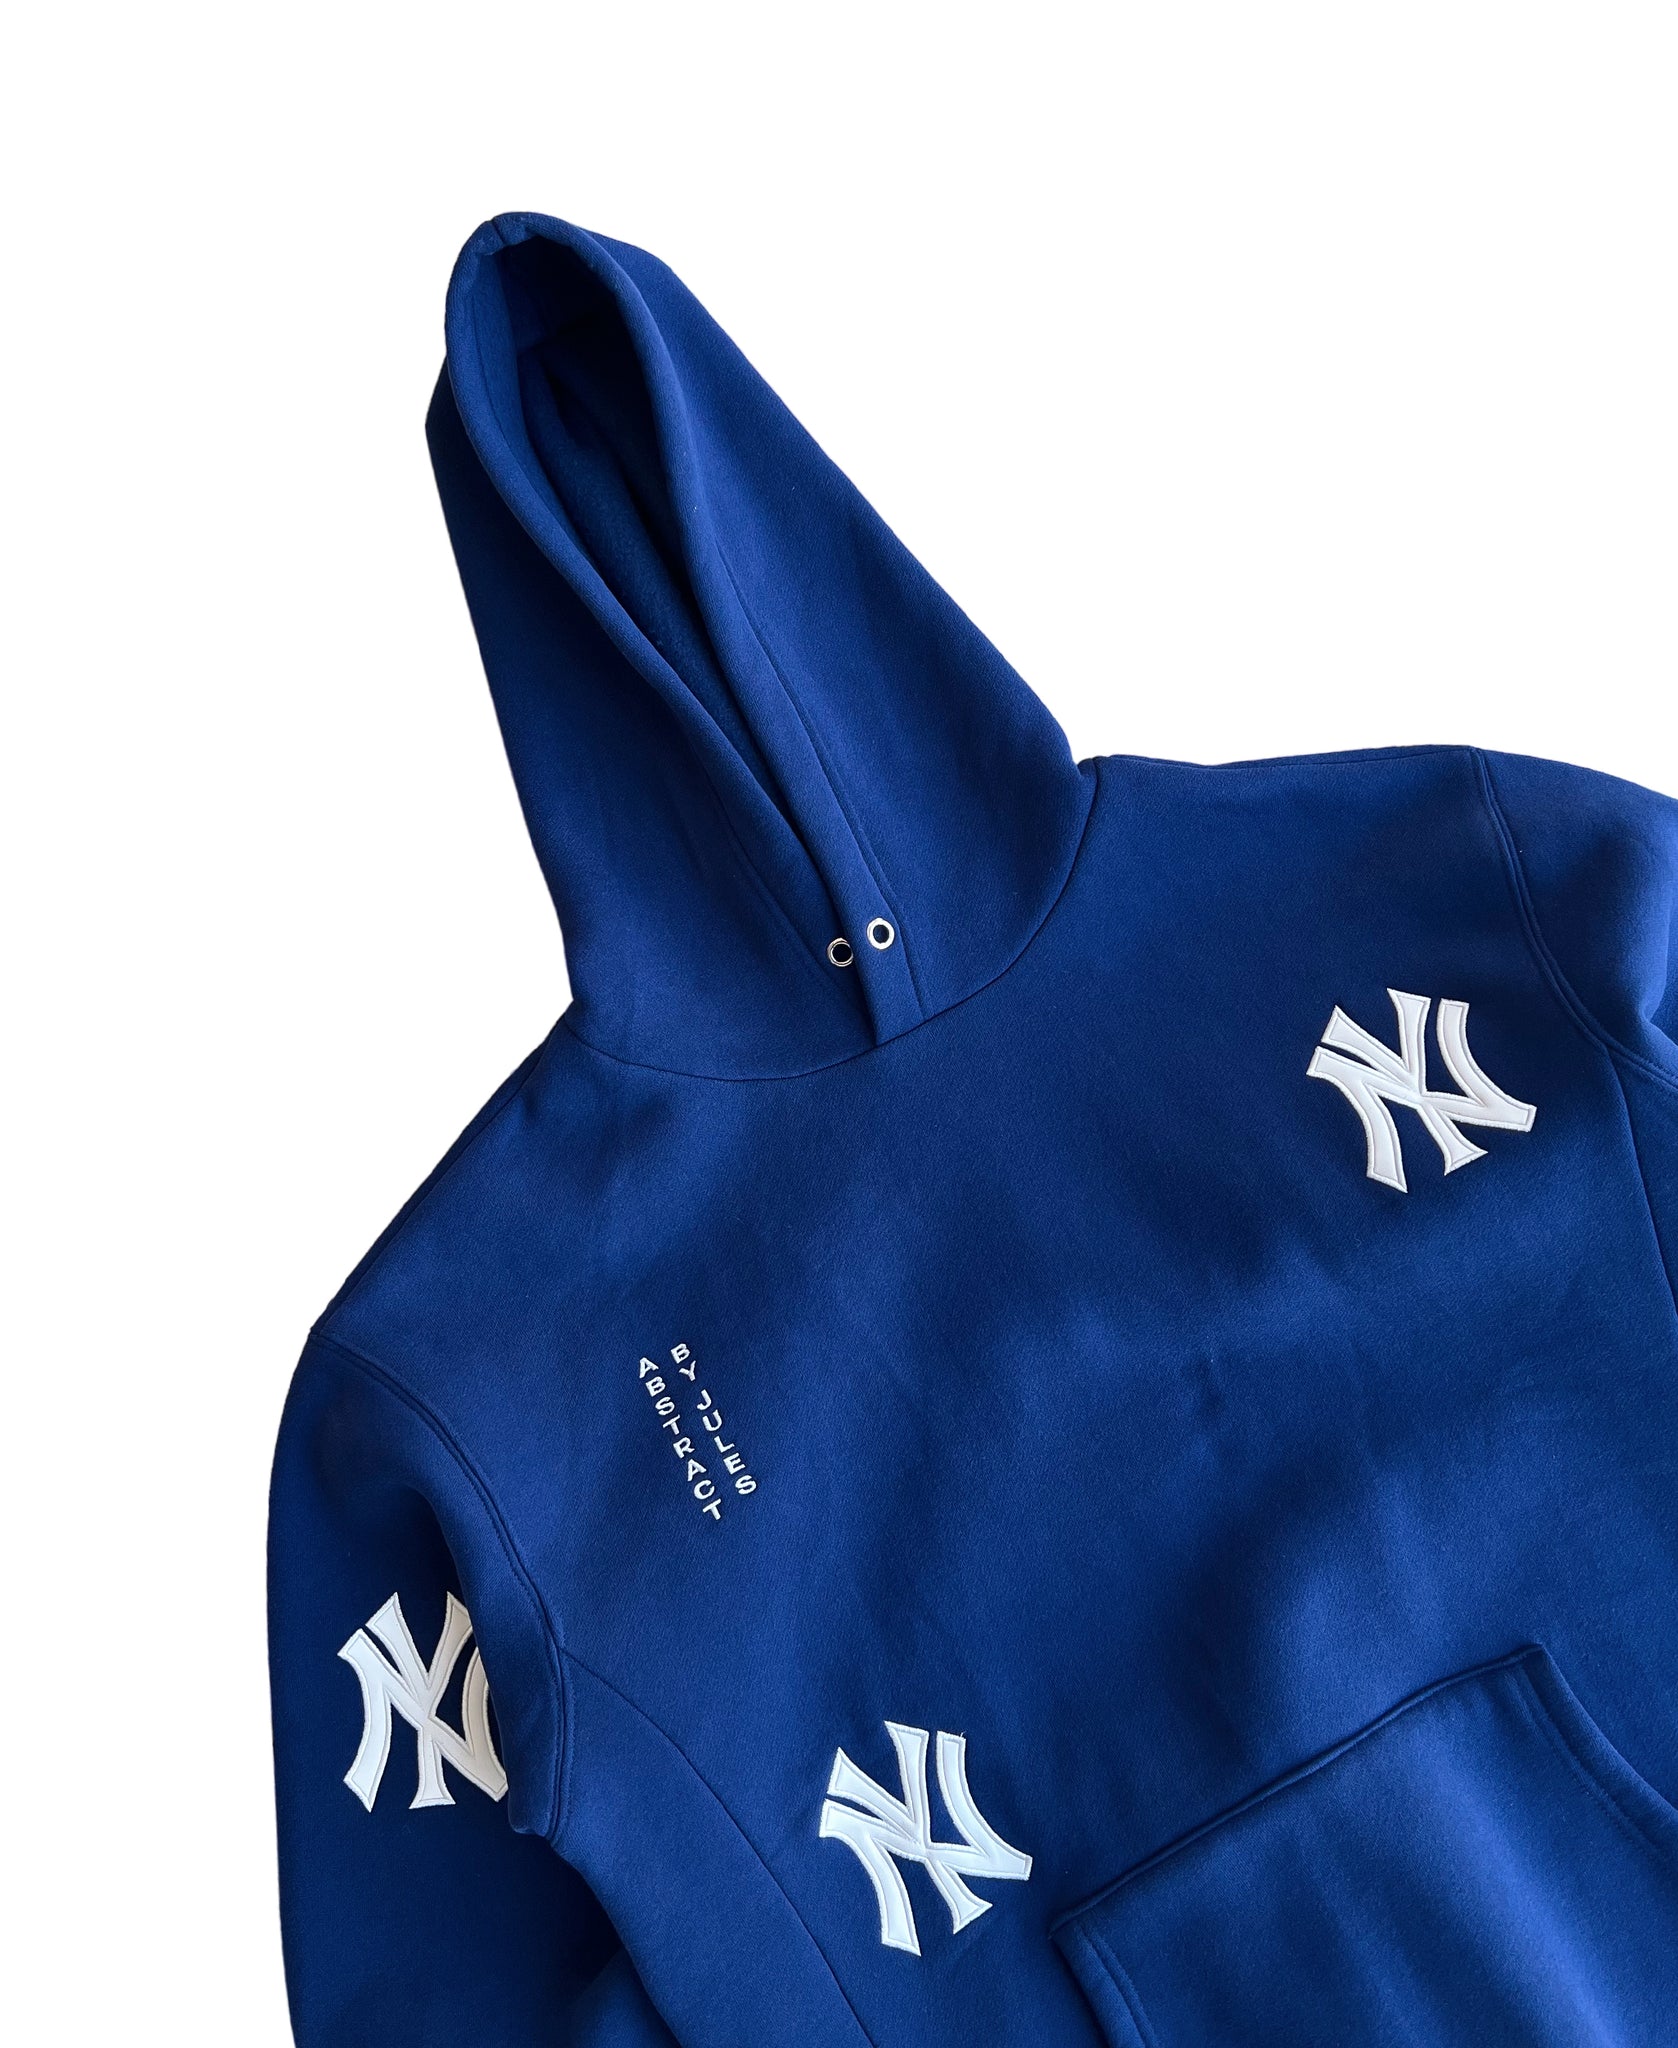 NY Patch Hoodie - Navy